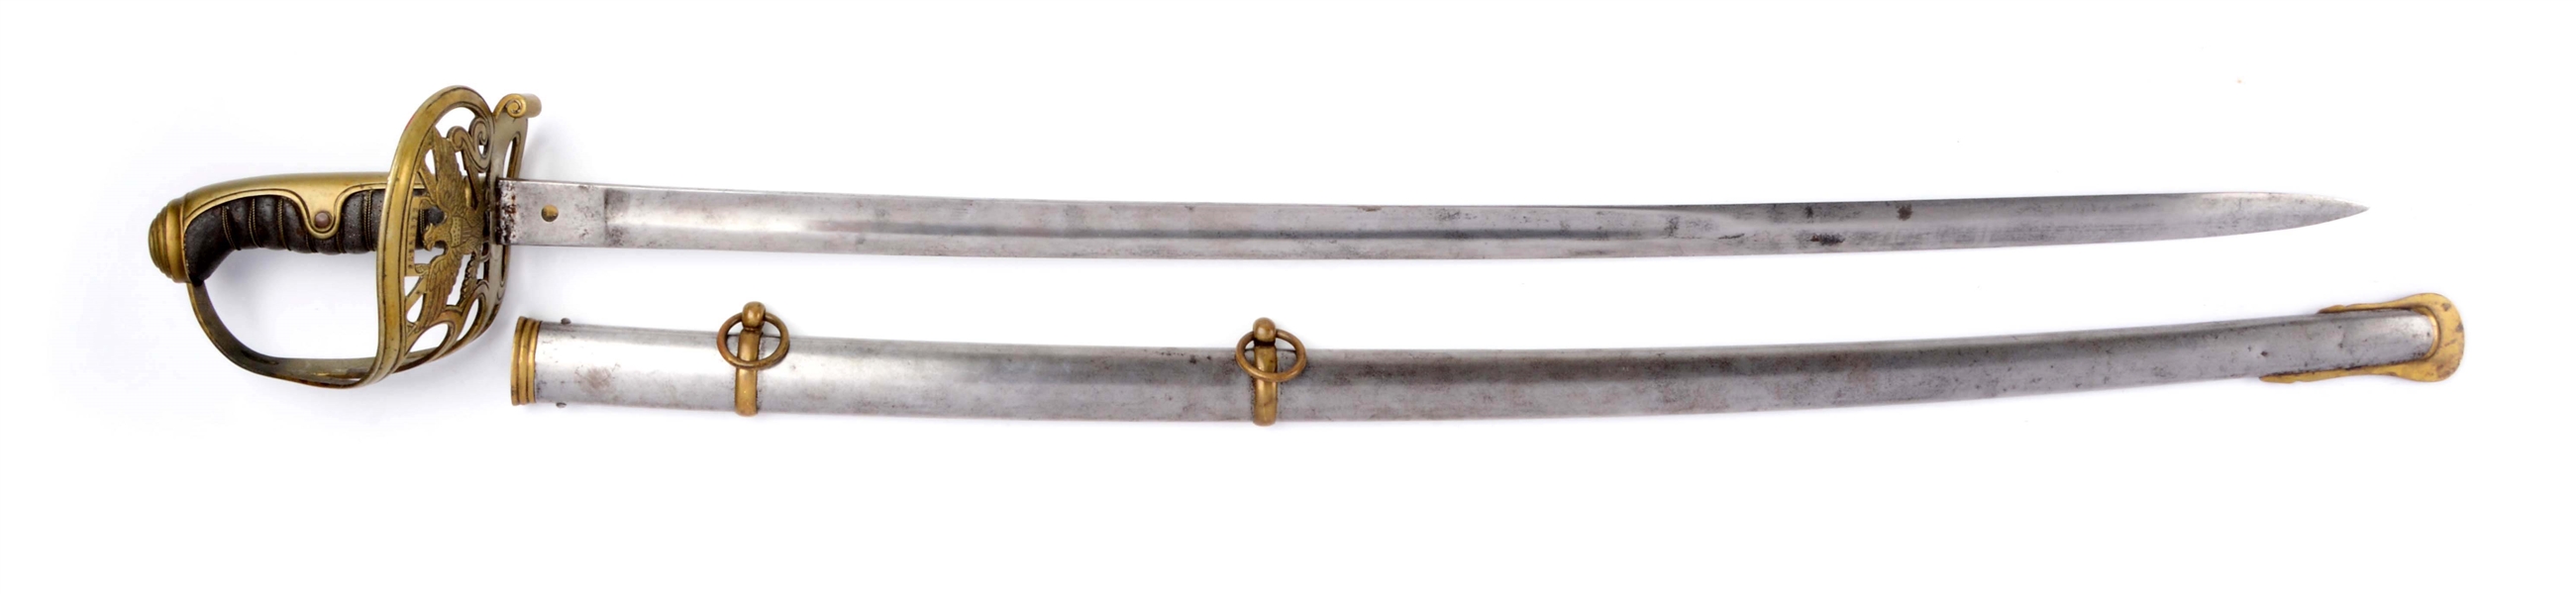 IMPORTED CIVIL WAR OFFICERS SWORD WITH SCABBARD.